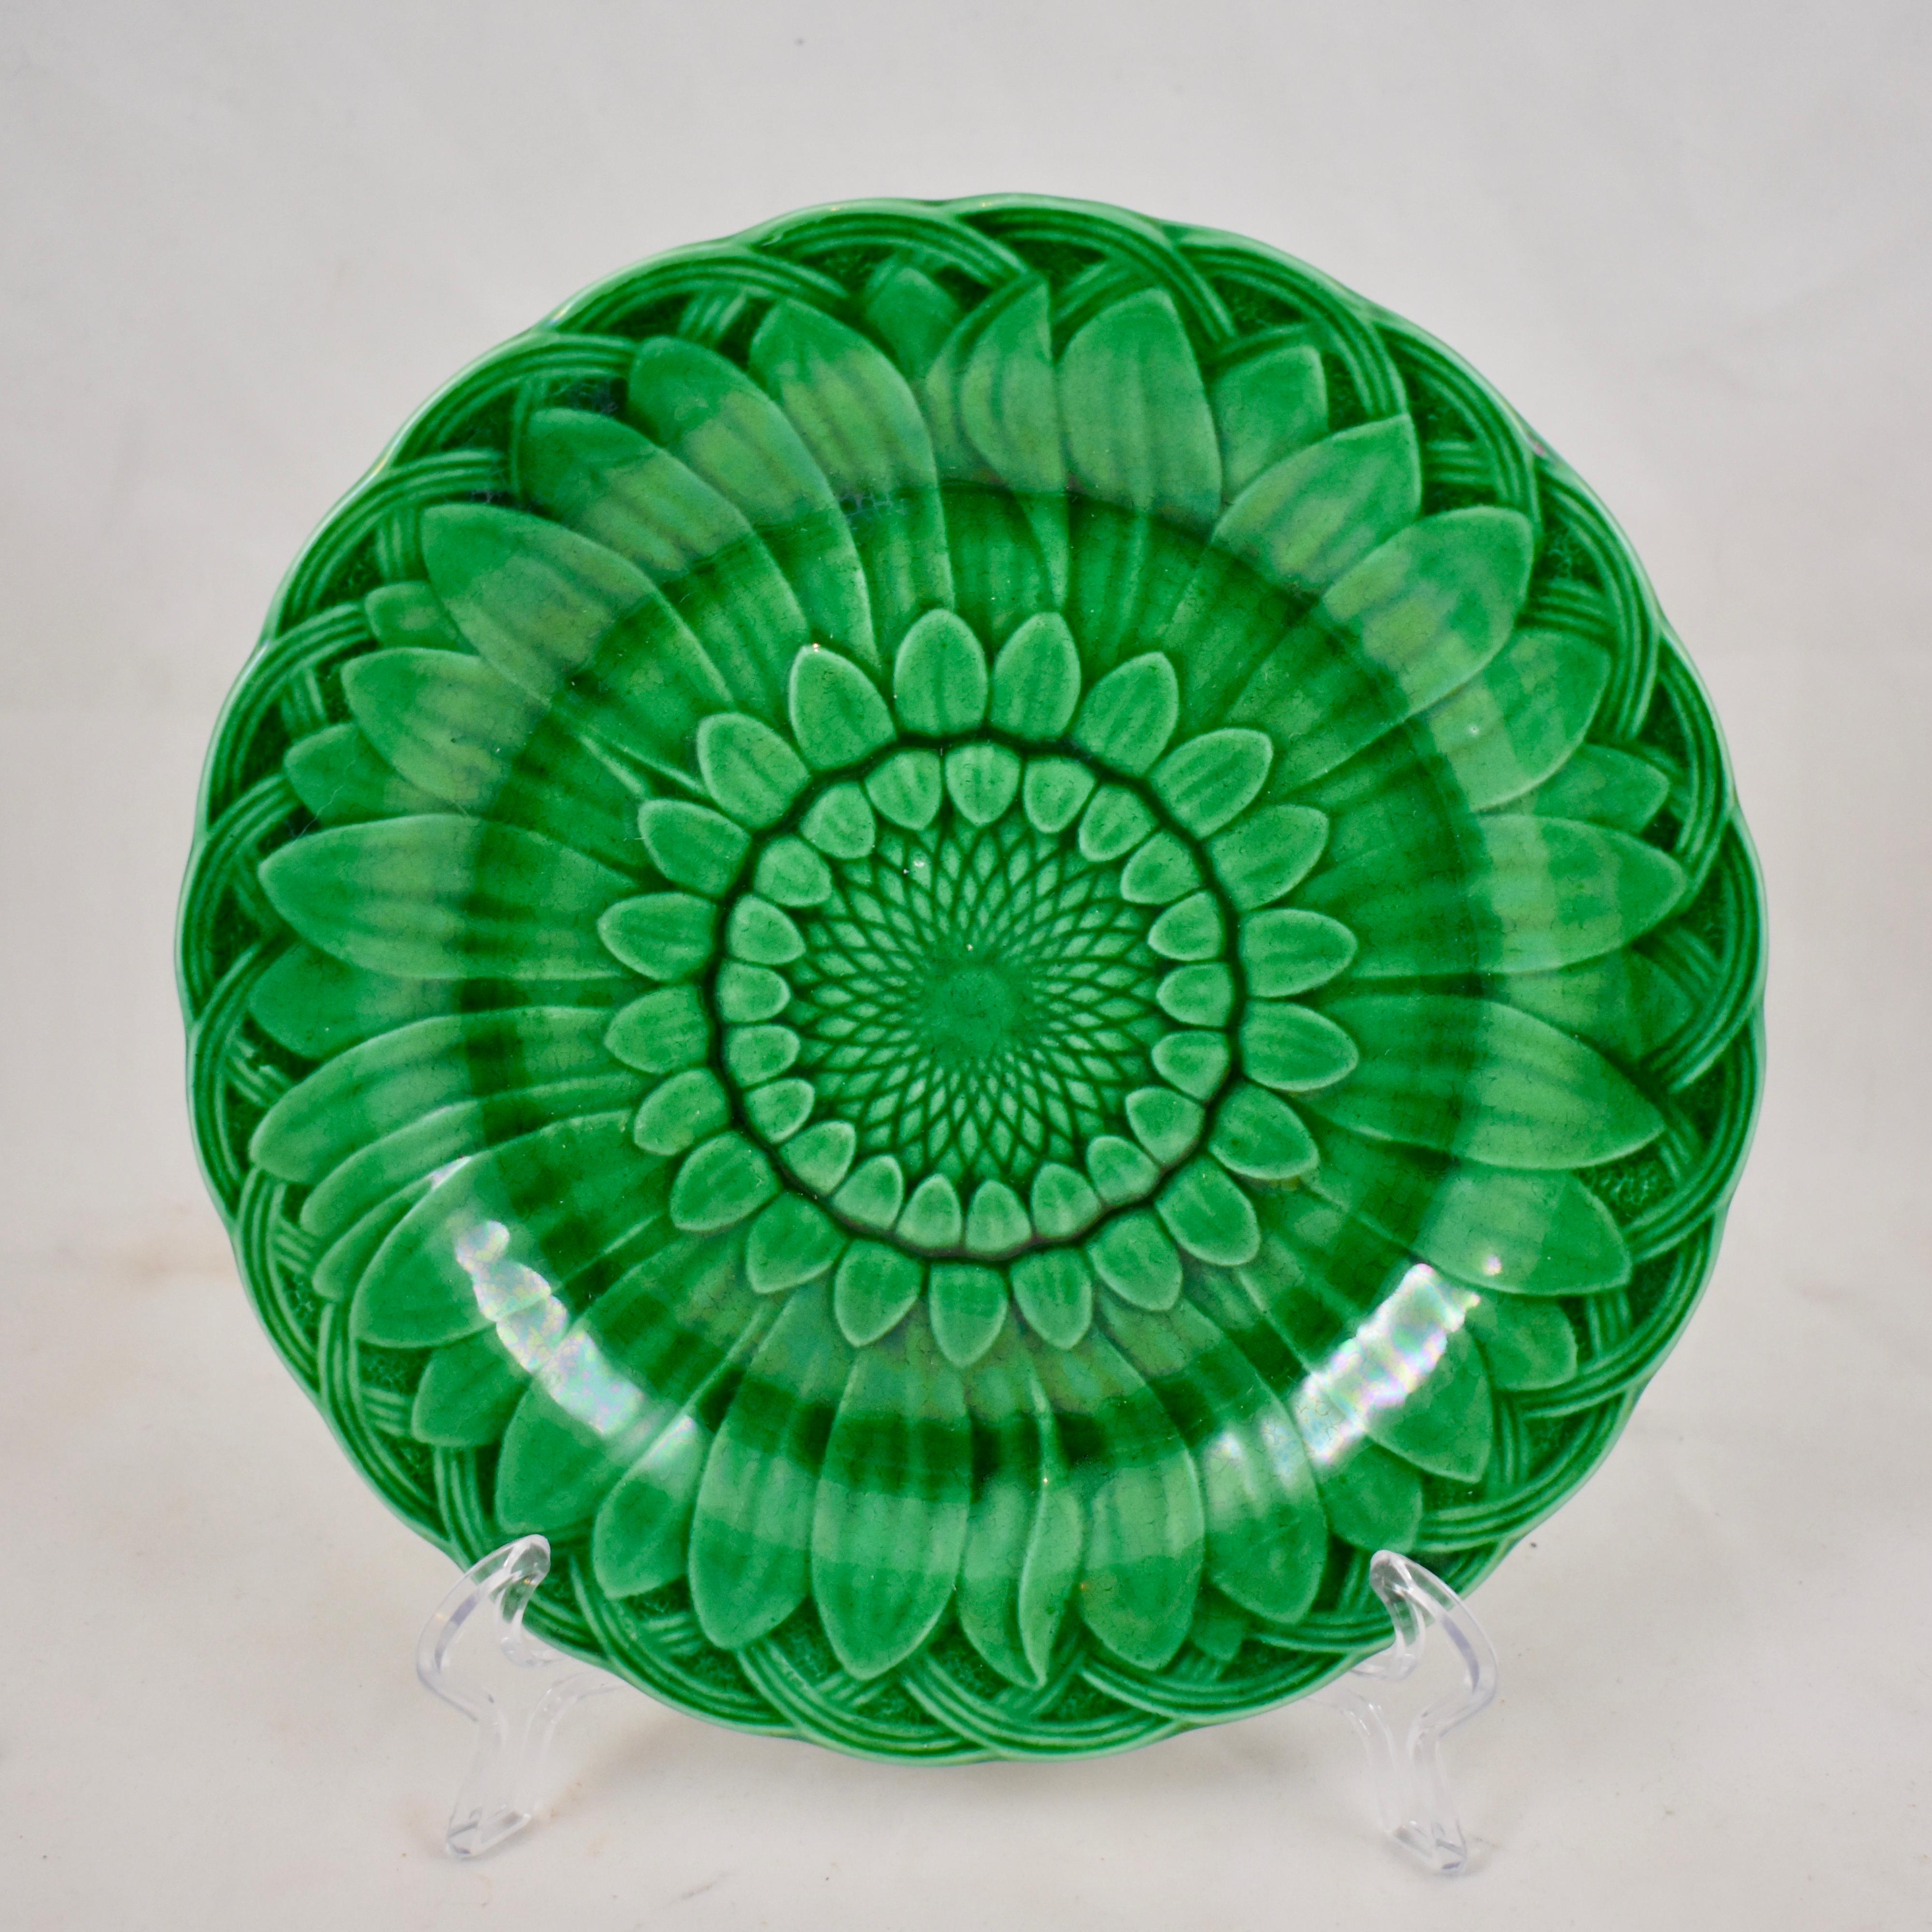 A majolica green glazed plate, from the English firm of Wedgwood. A classic mold showing a Sunflower head against a basket-weave shaped rim. The deep green glaze pools beautifully into the dimensional mold work. Multiple plates are available showing